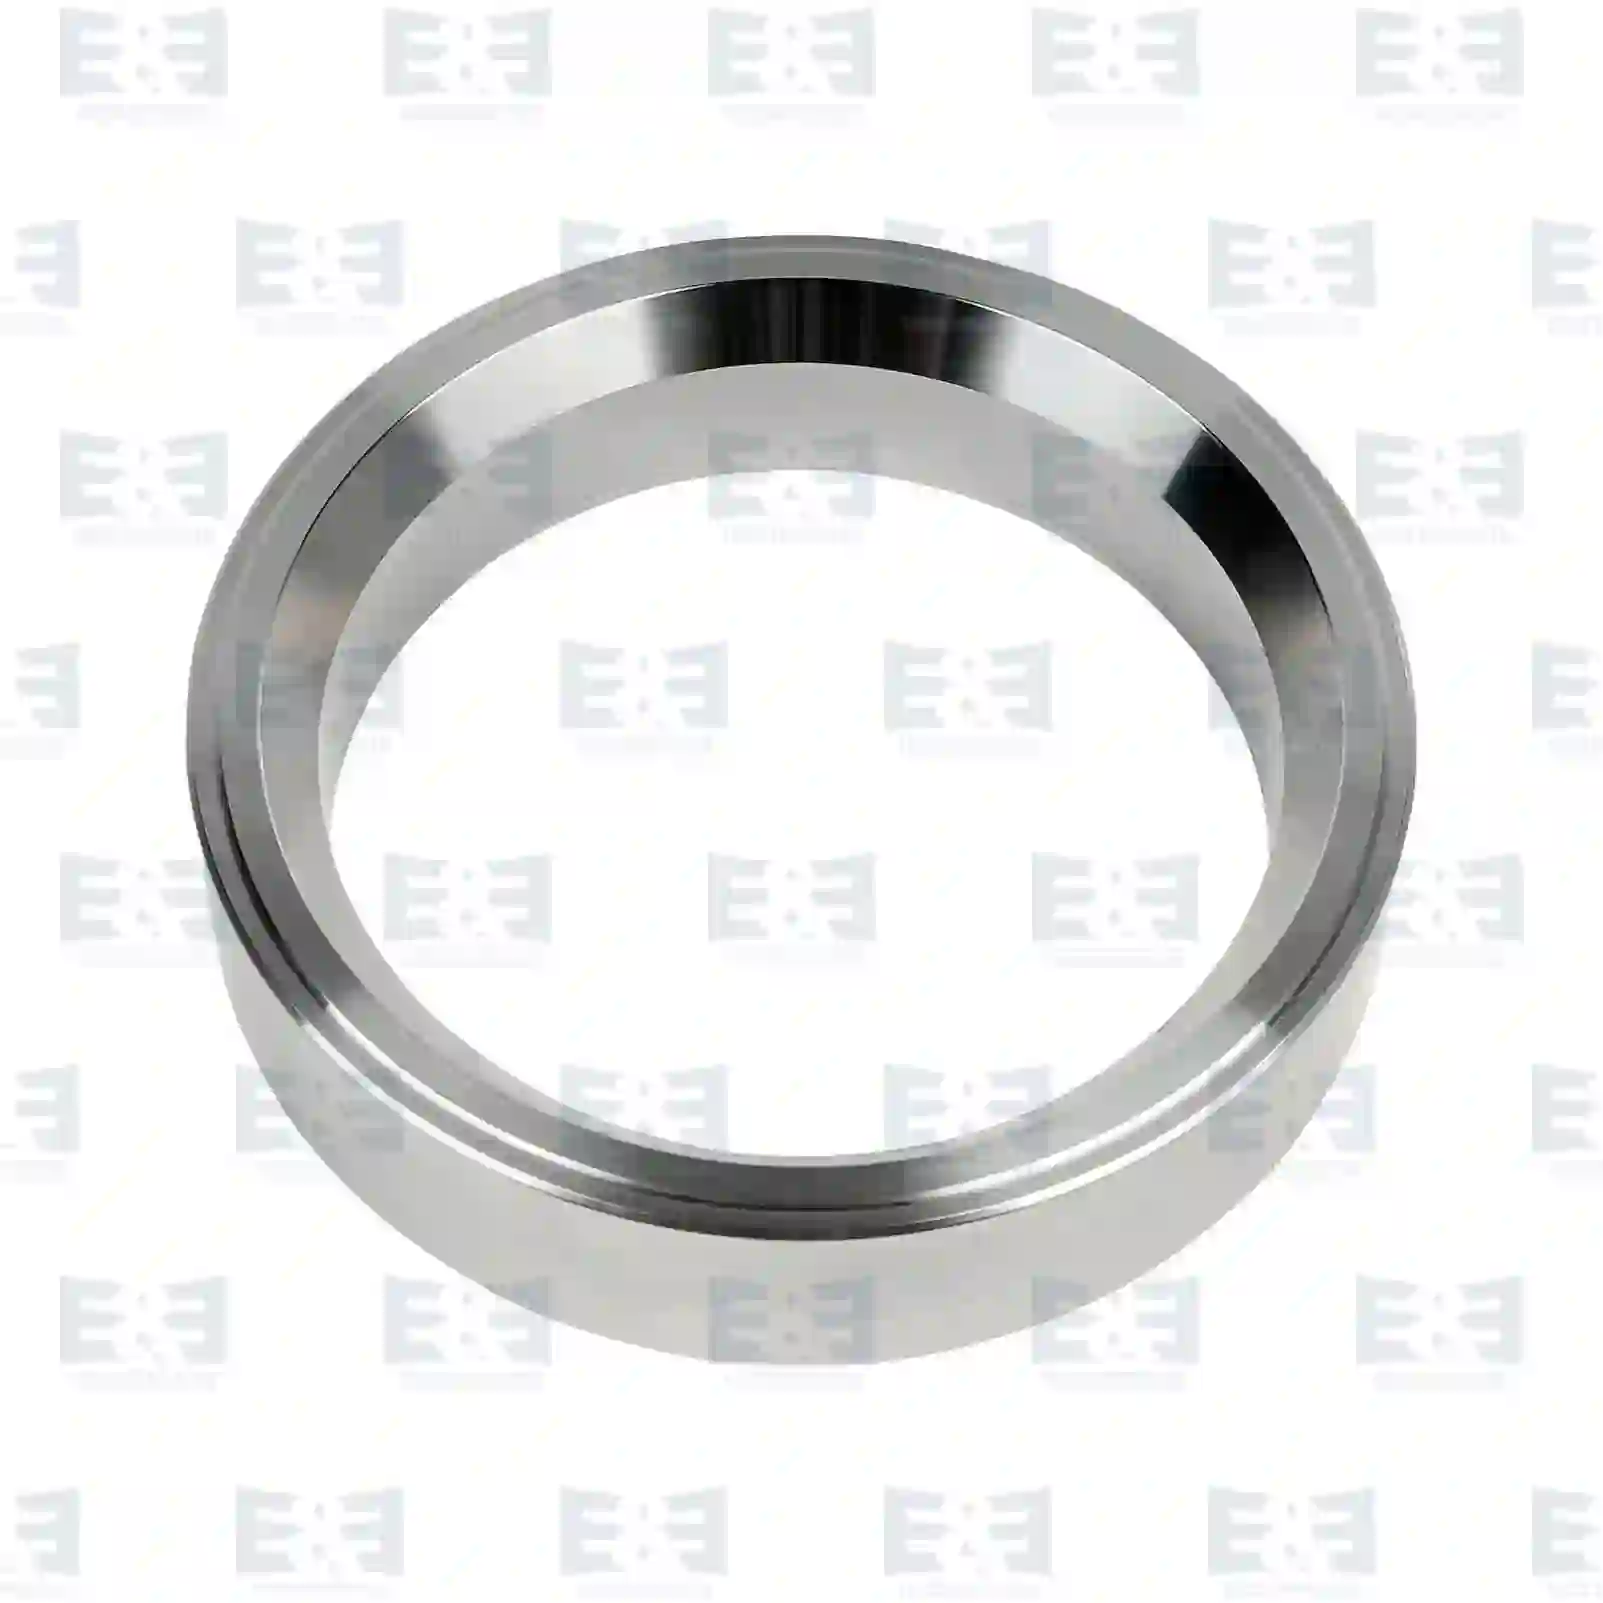 Hub Thrust ring, EE No 2E2284038 ,  oem no:81357100044, 81357100094, 81357100101, 3463560315, 3463561415, 9423560415, ZG30166-0008 E&E Truck Spare Parts | Truck Spare Parts, Auotomotive Spare Parts